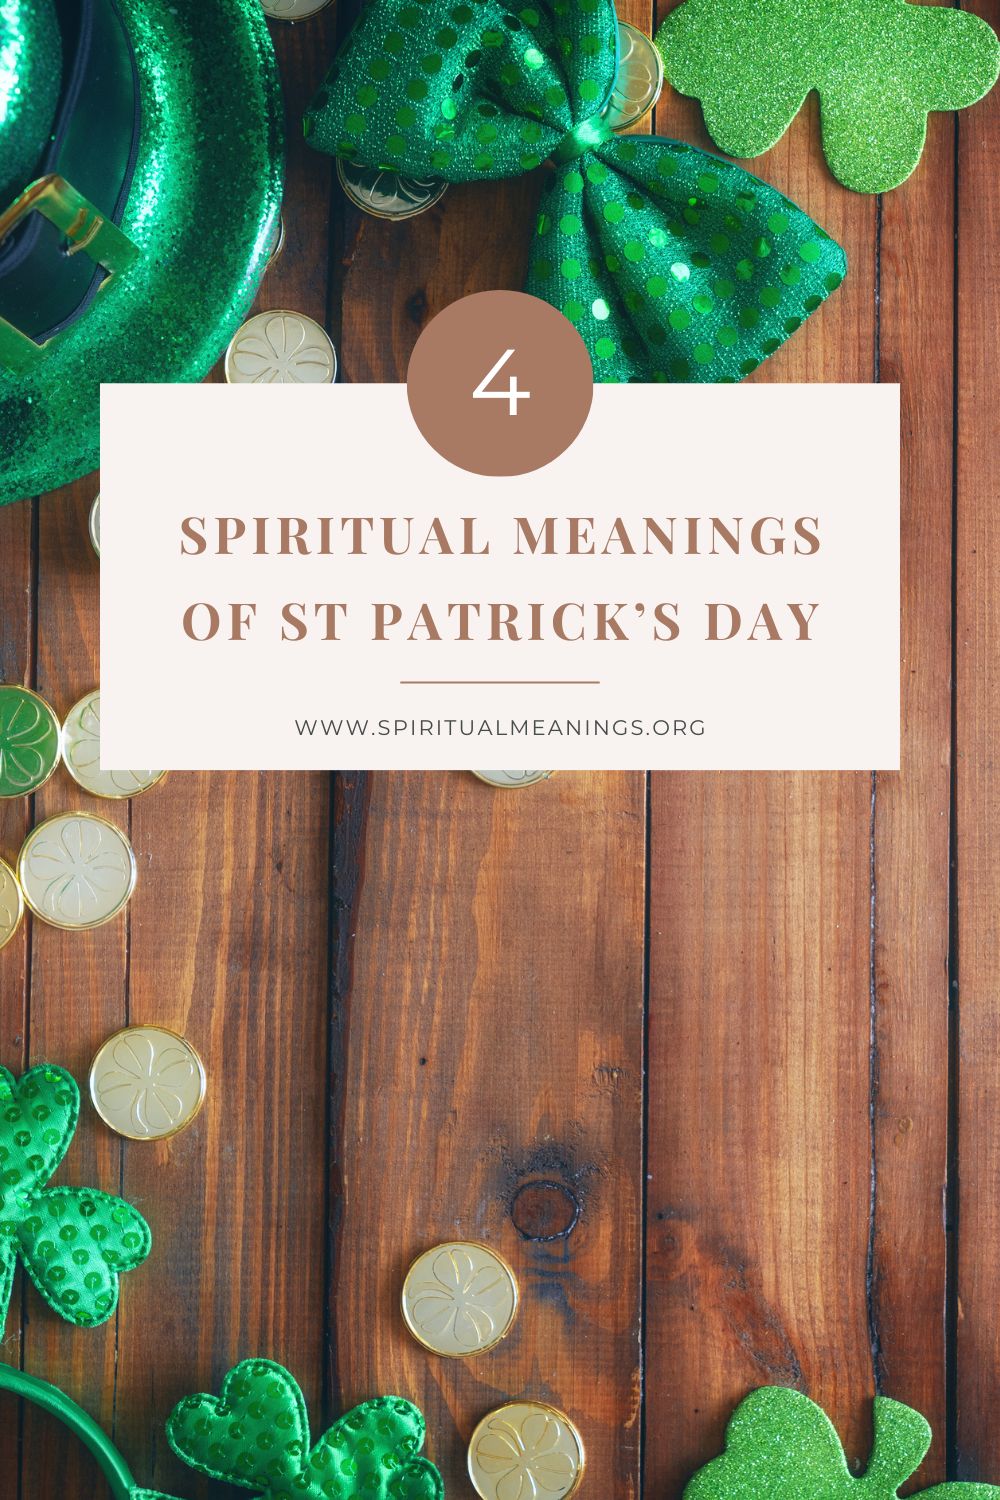 Spiritual Meanings of St Patrick’s Day